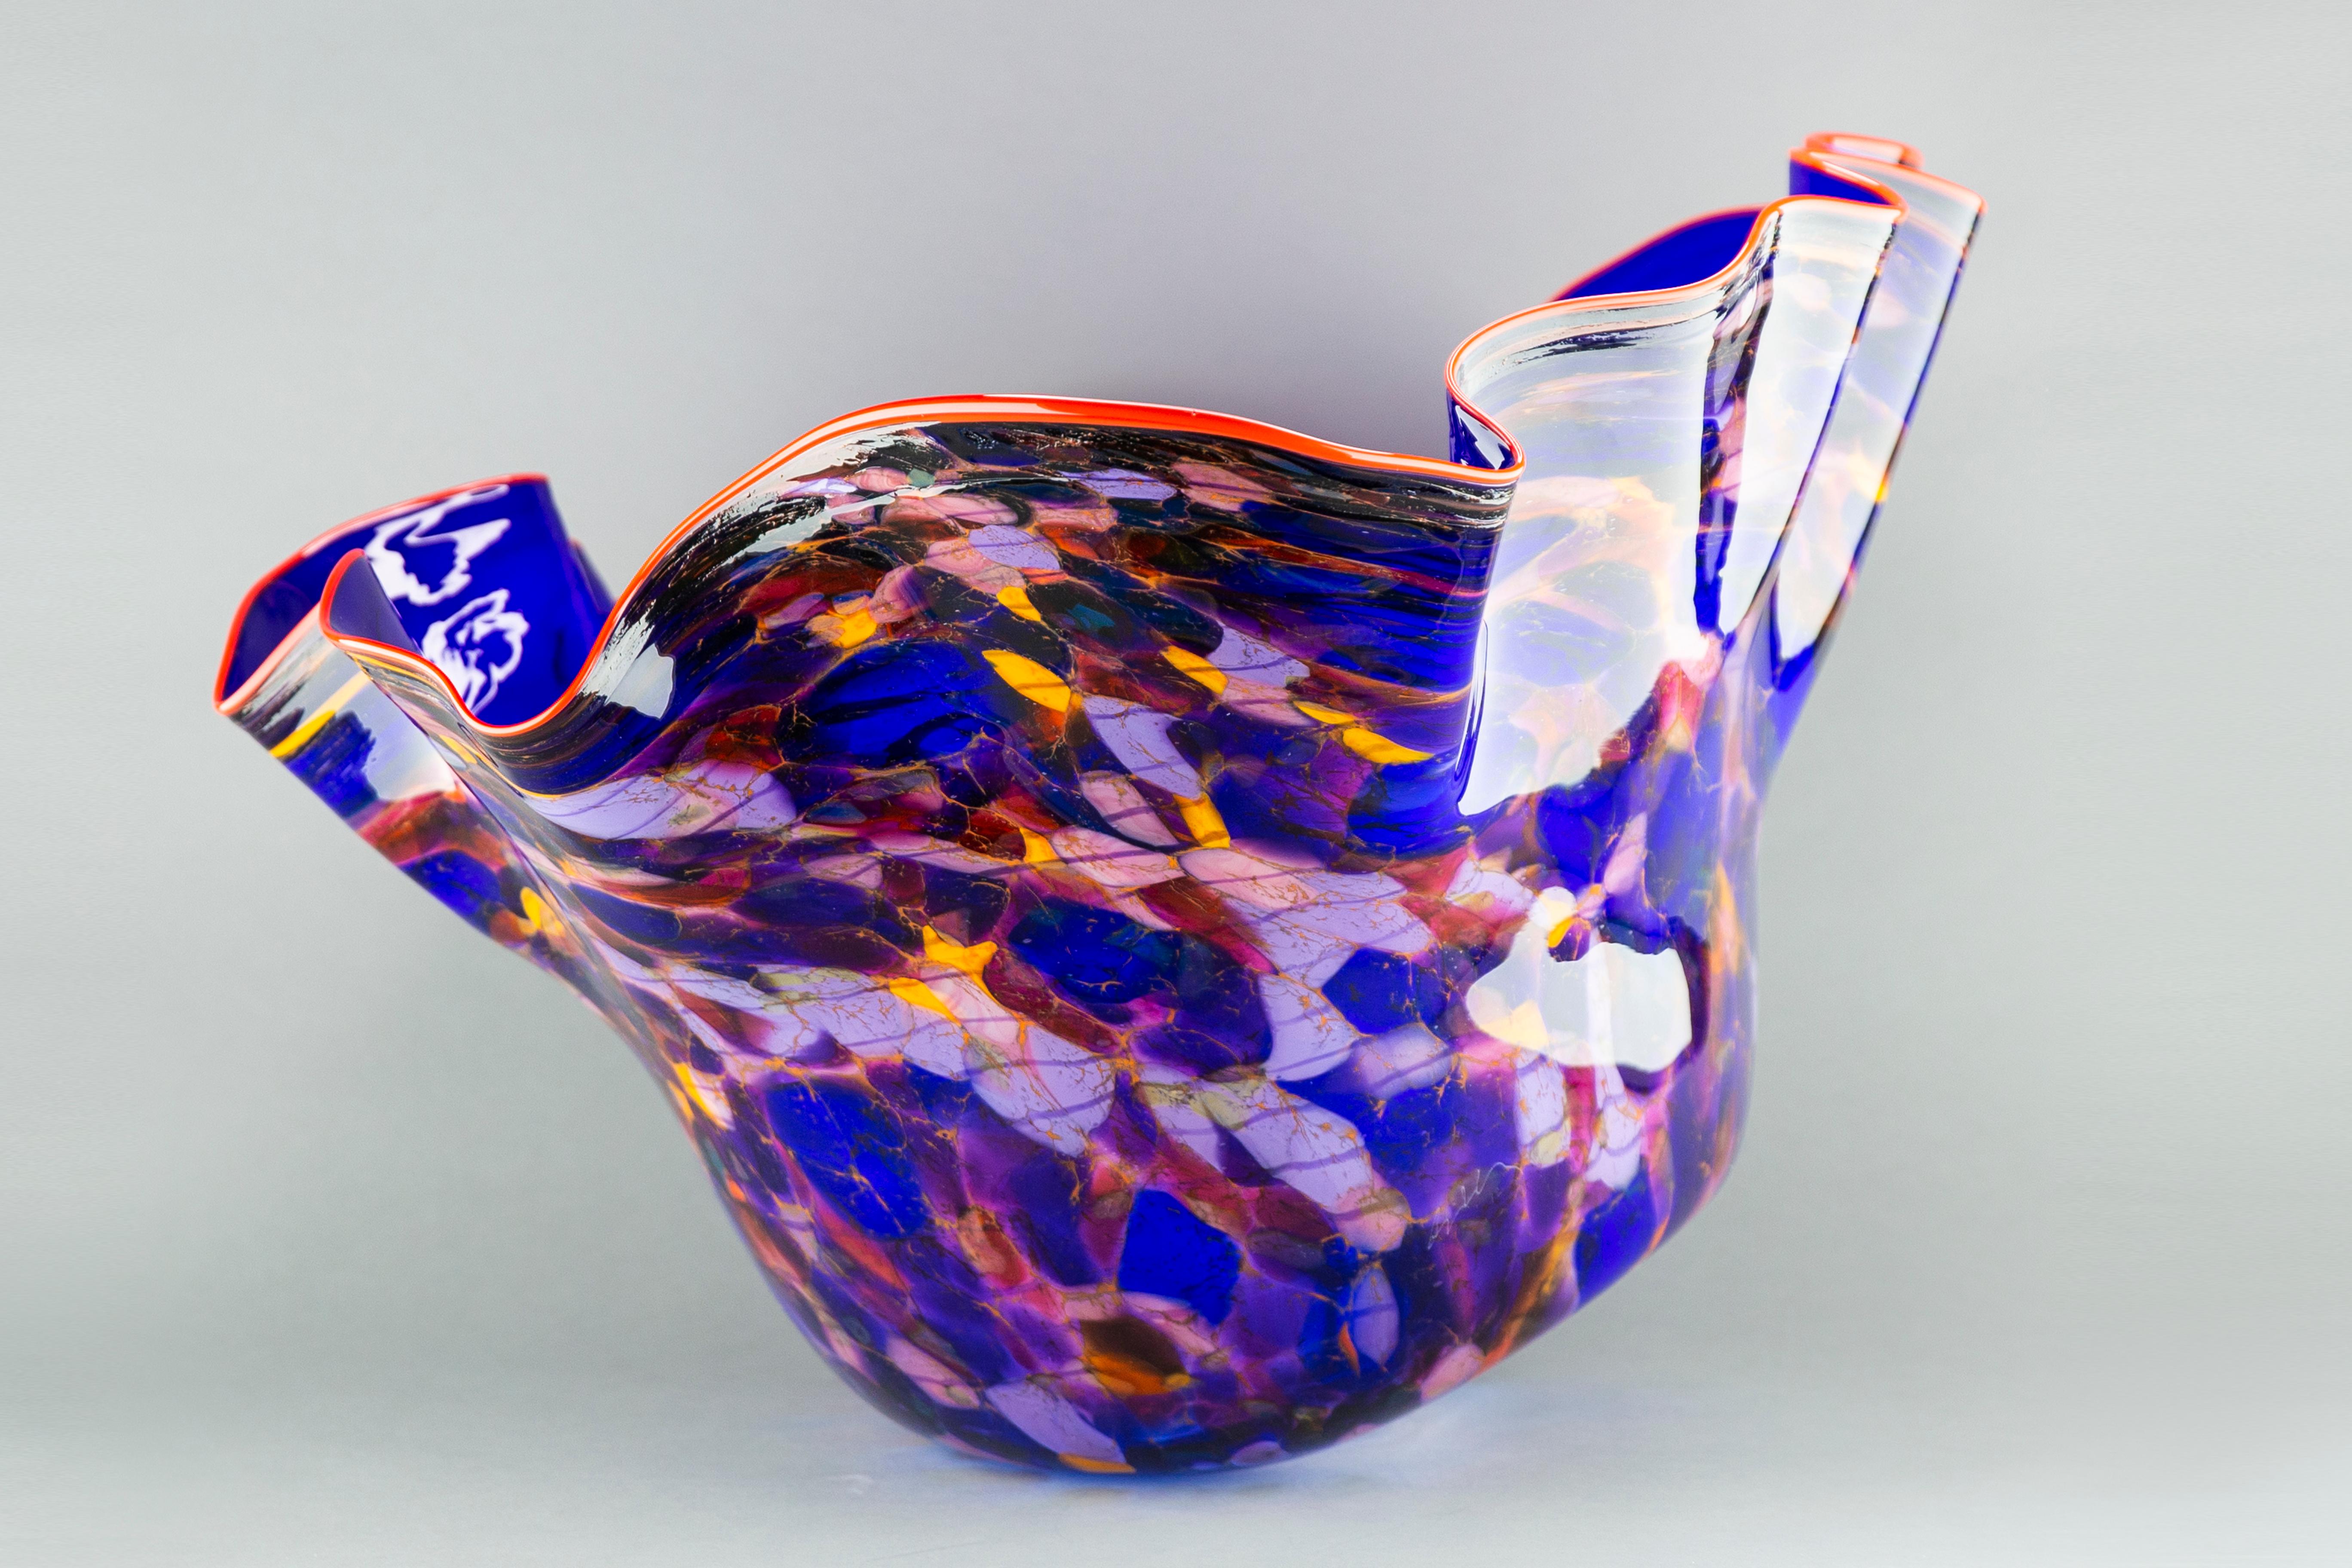 Artist: Dale Chihuly
Title: Royal Bue Macchia with Para Red Lip
Medium: Handblown glass
Size: 20